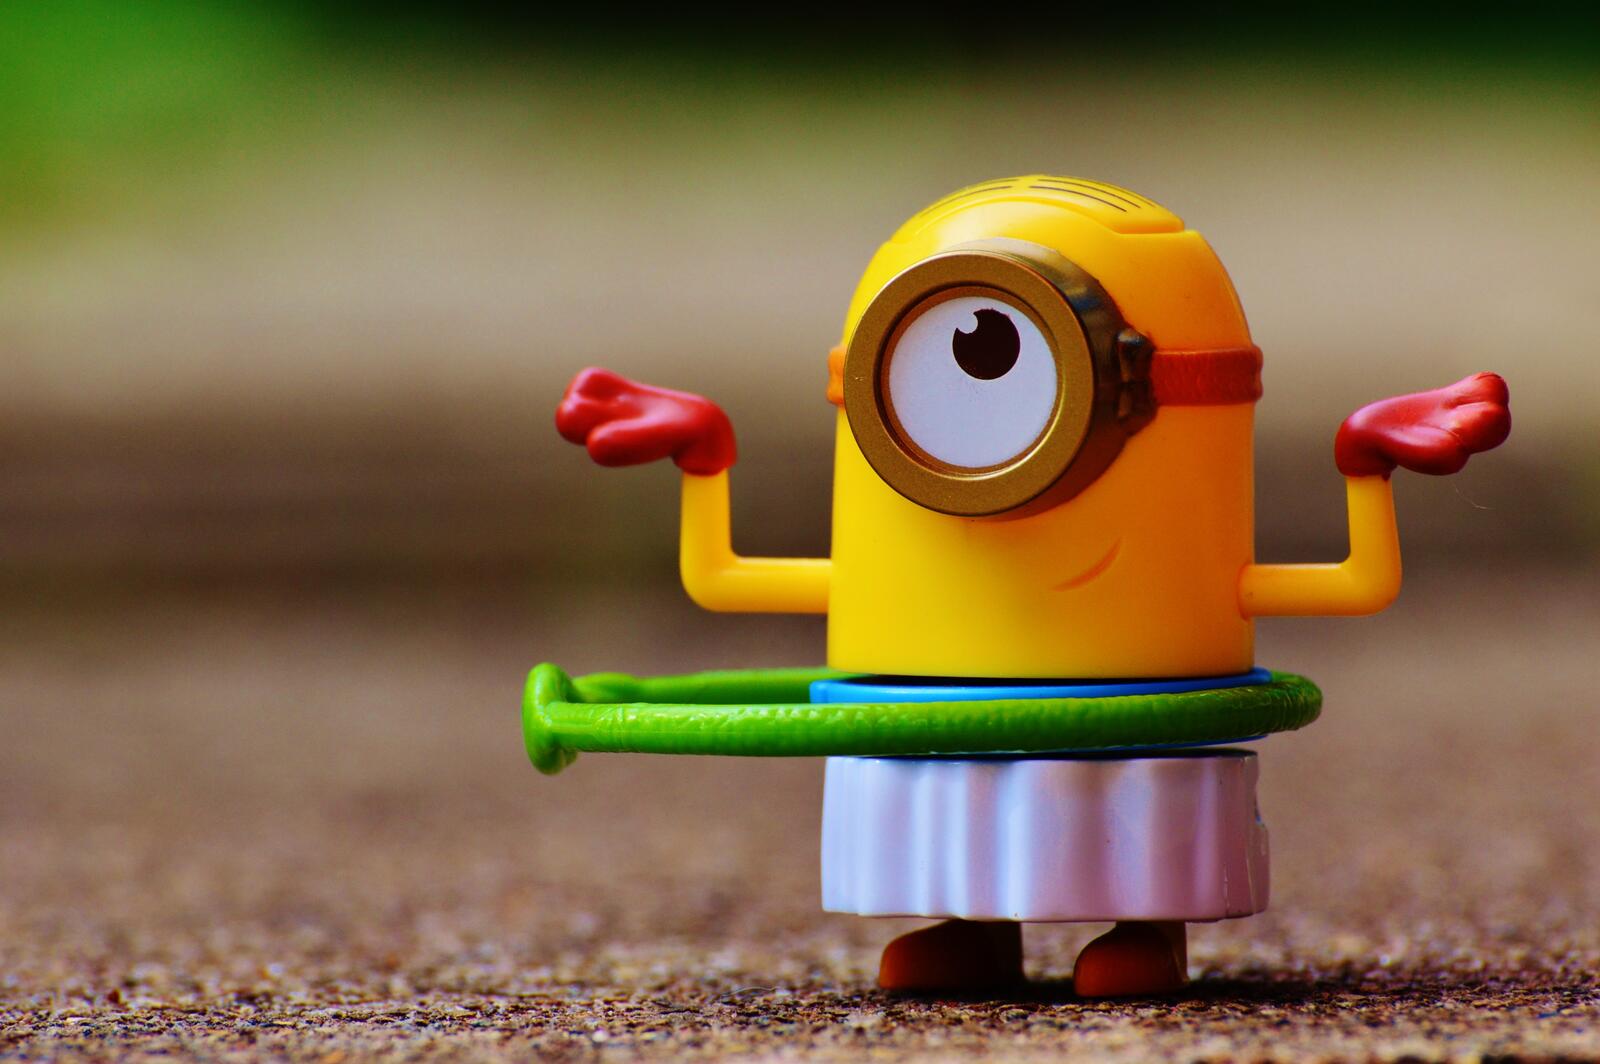 Wallpapers toy funny minion on the desktop